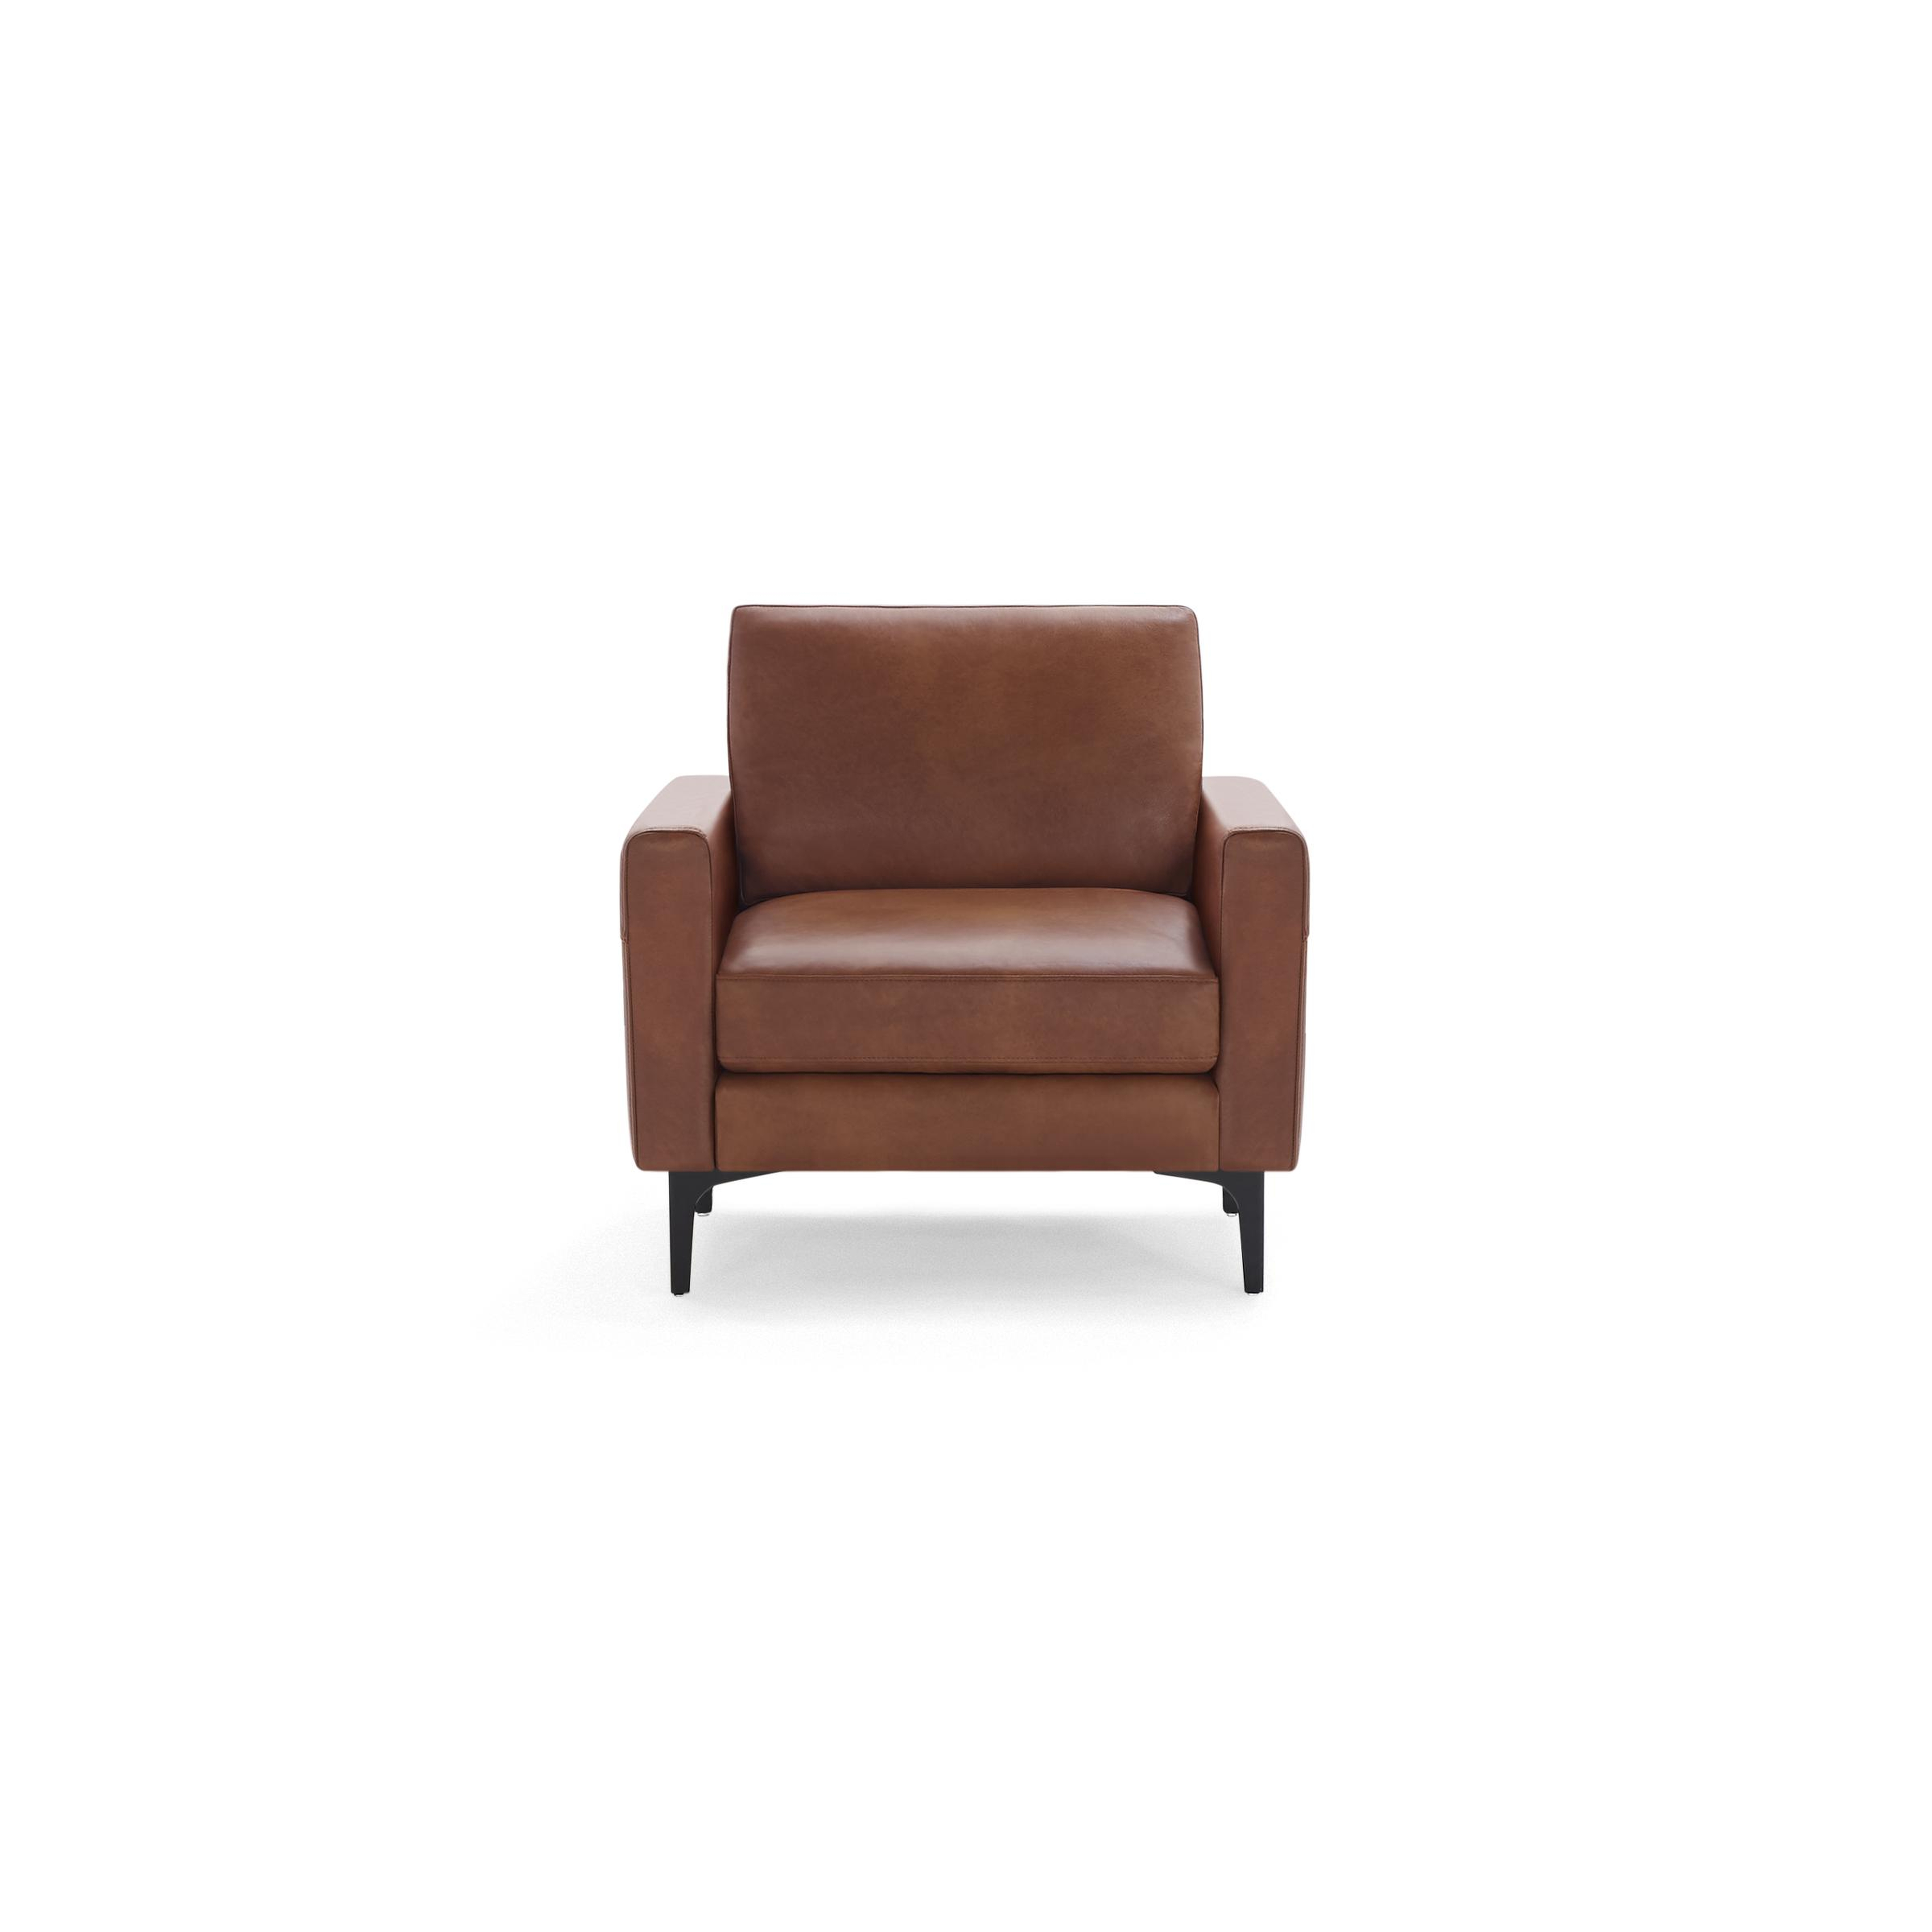 Nomad Leather Club Chair in Chestnut - Burrow